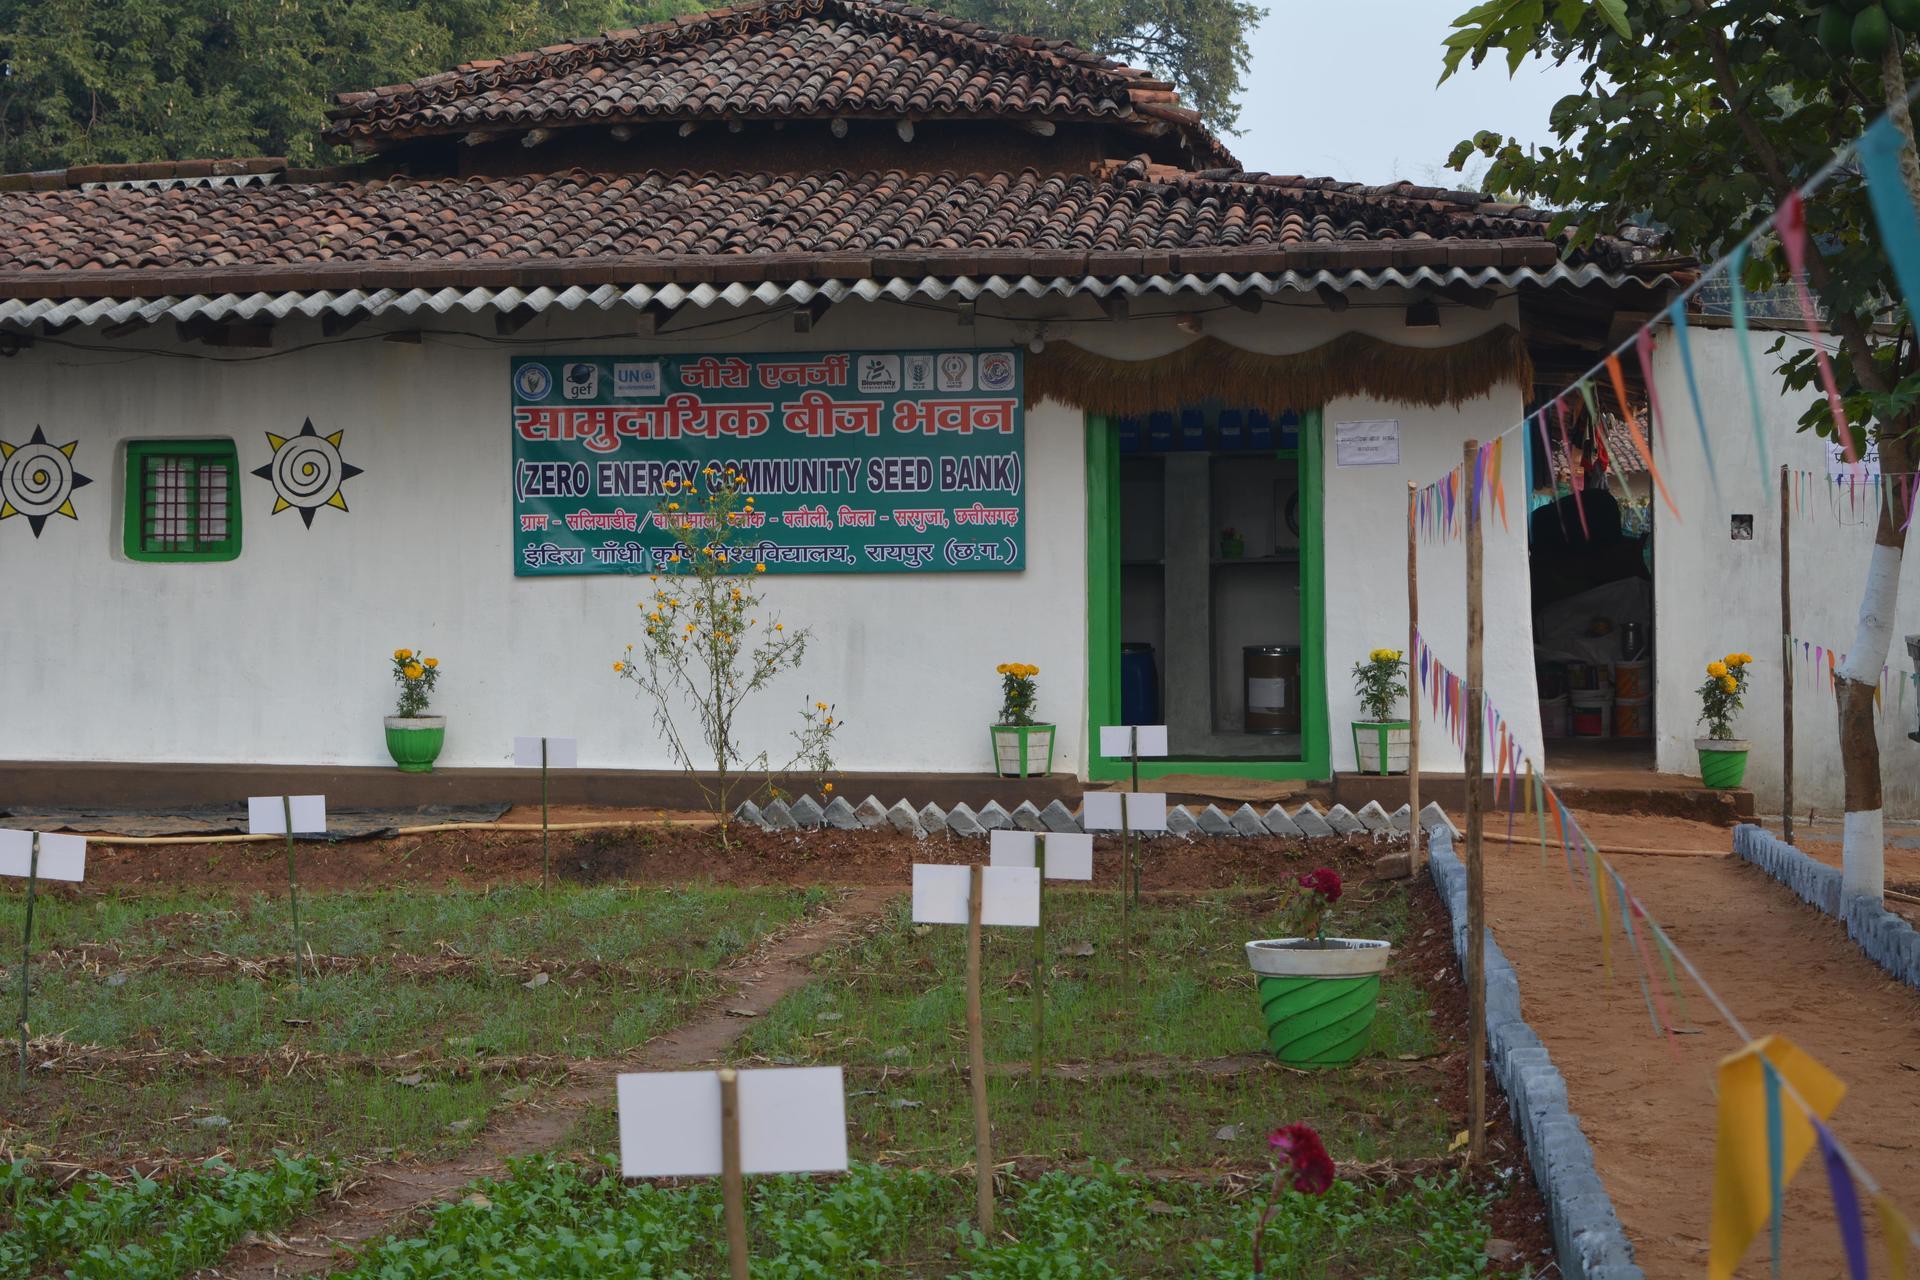 Planting seeds of hope in India - Alliance Bioversity International - CIAT